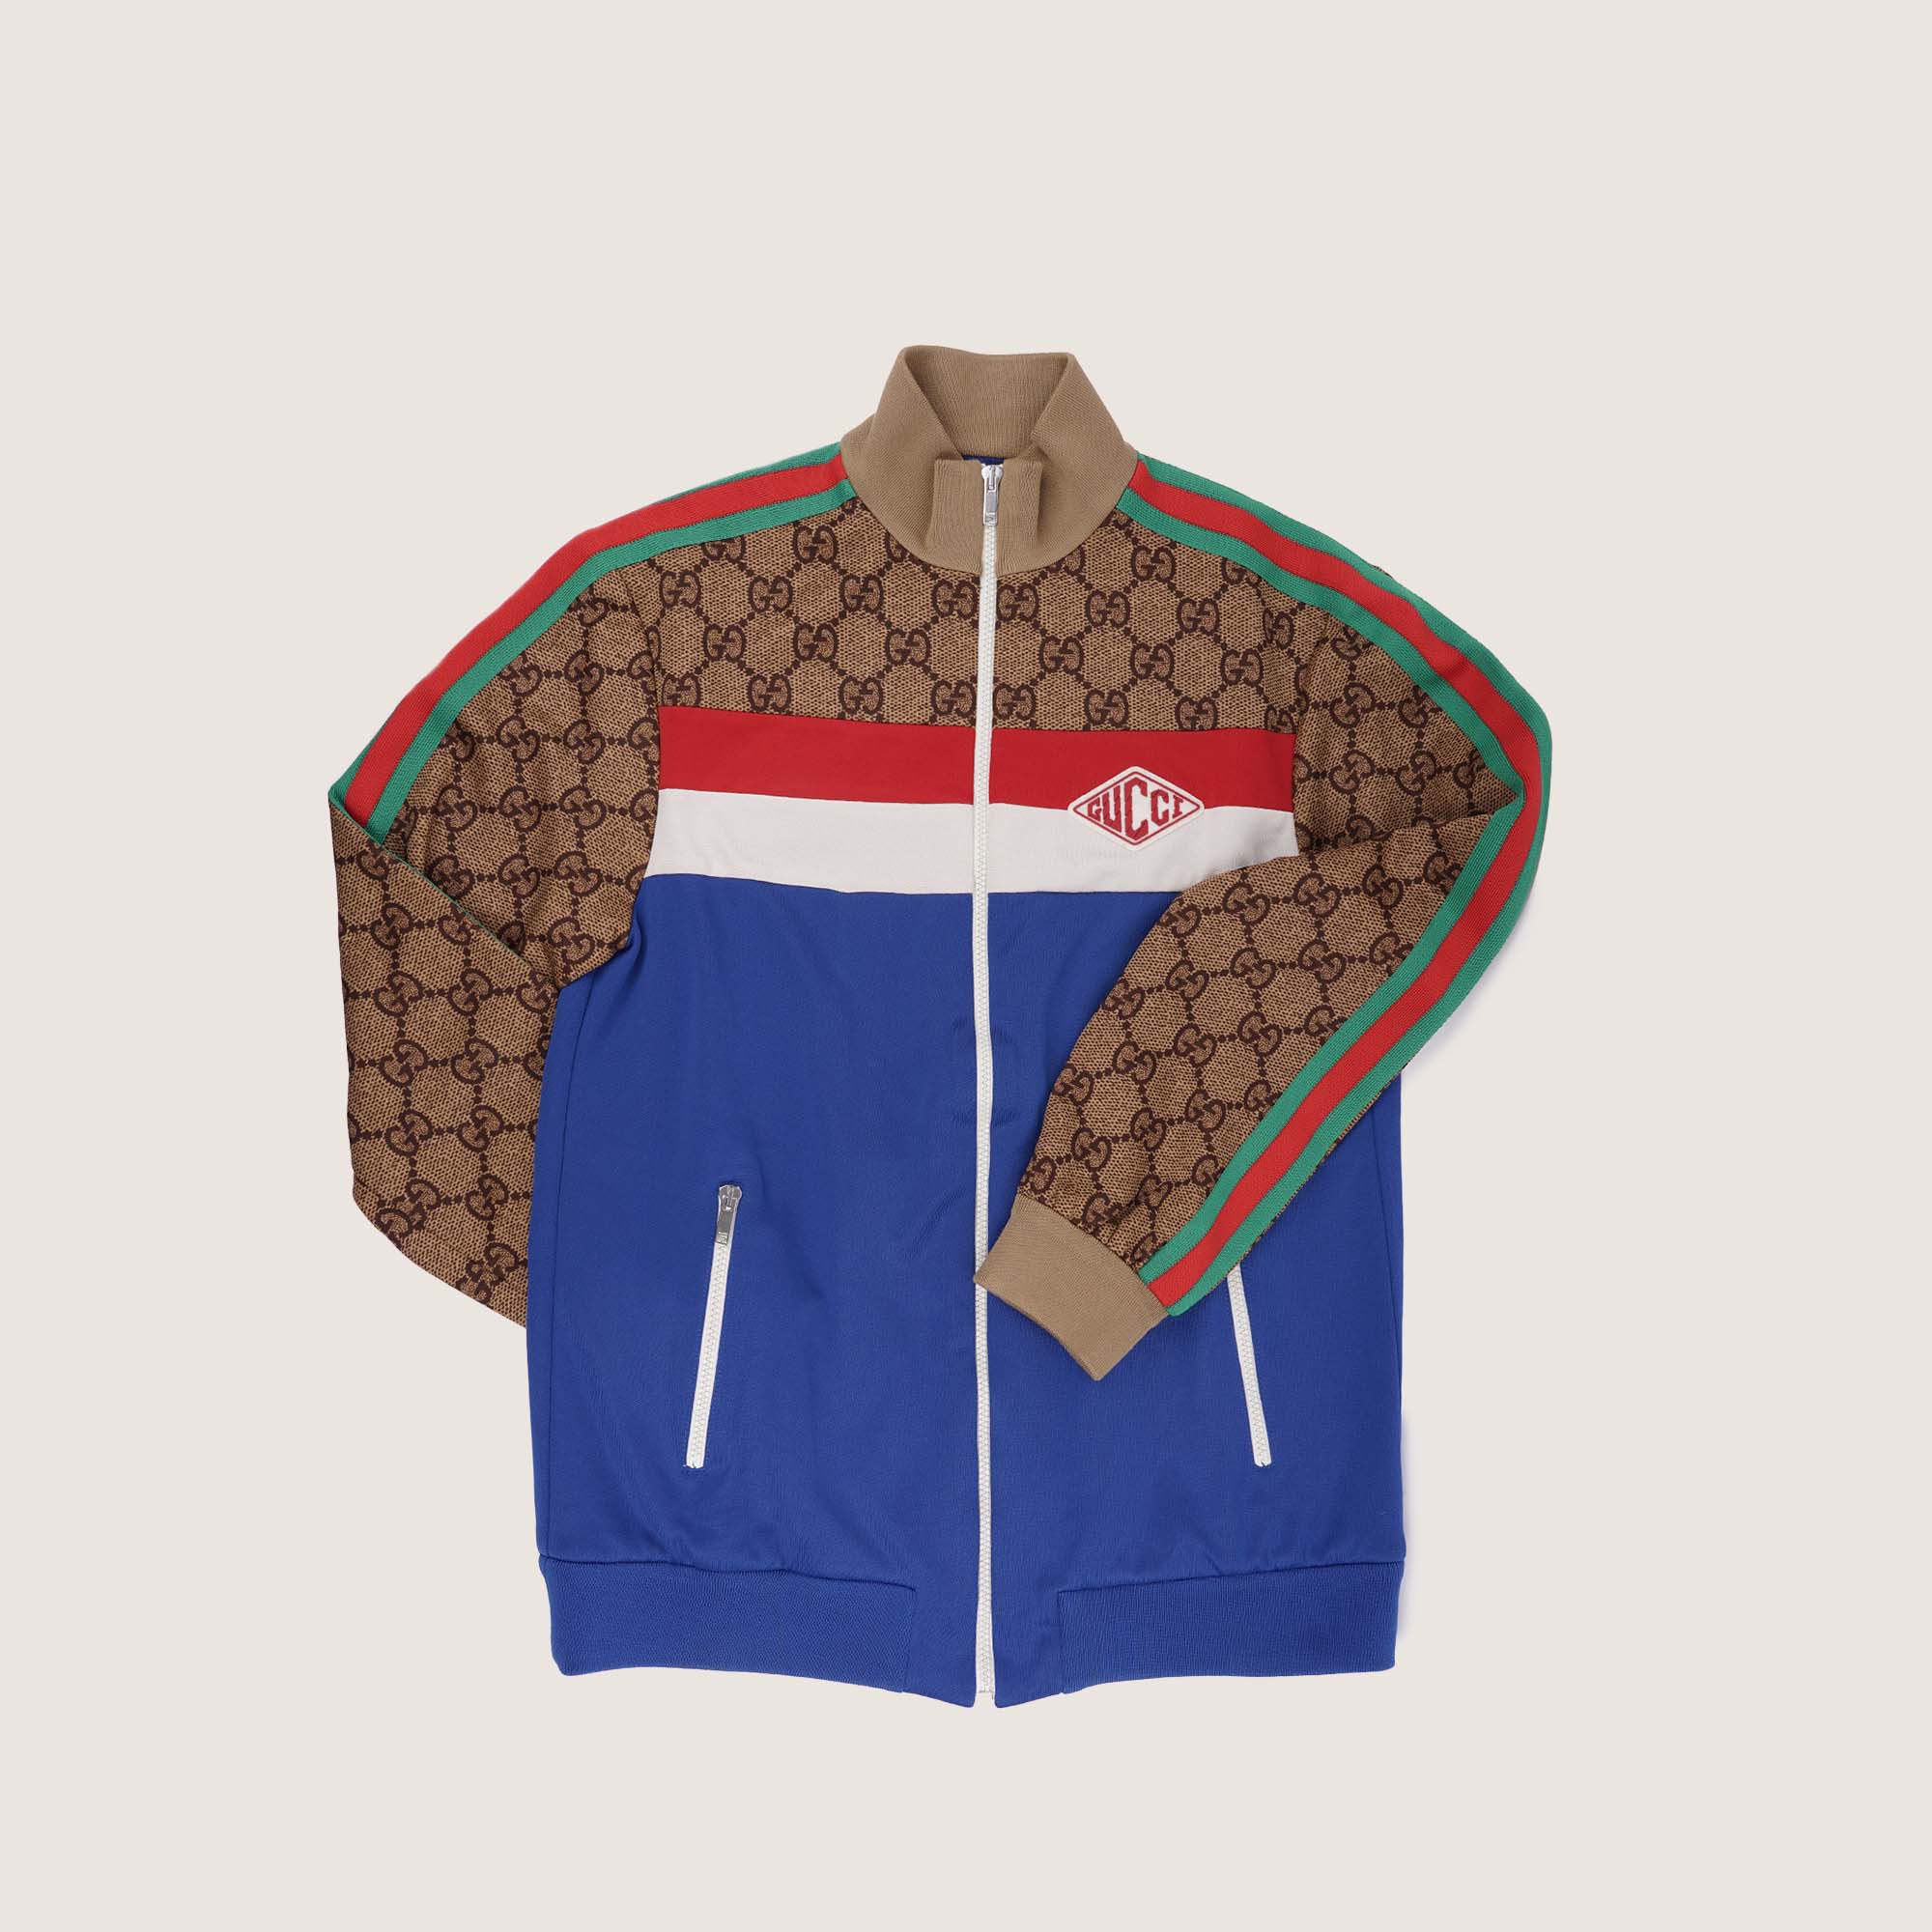 GG Technical Jersey Jacket M - GUCCI - Affordable Luxury image